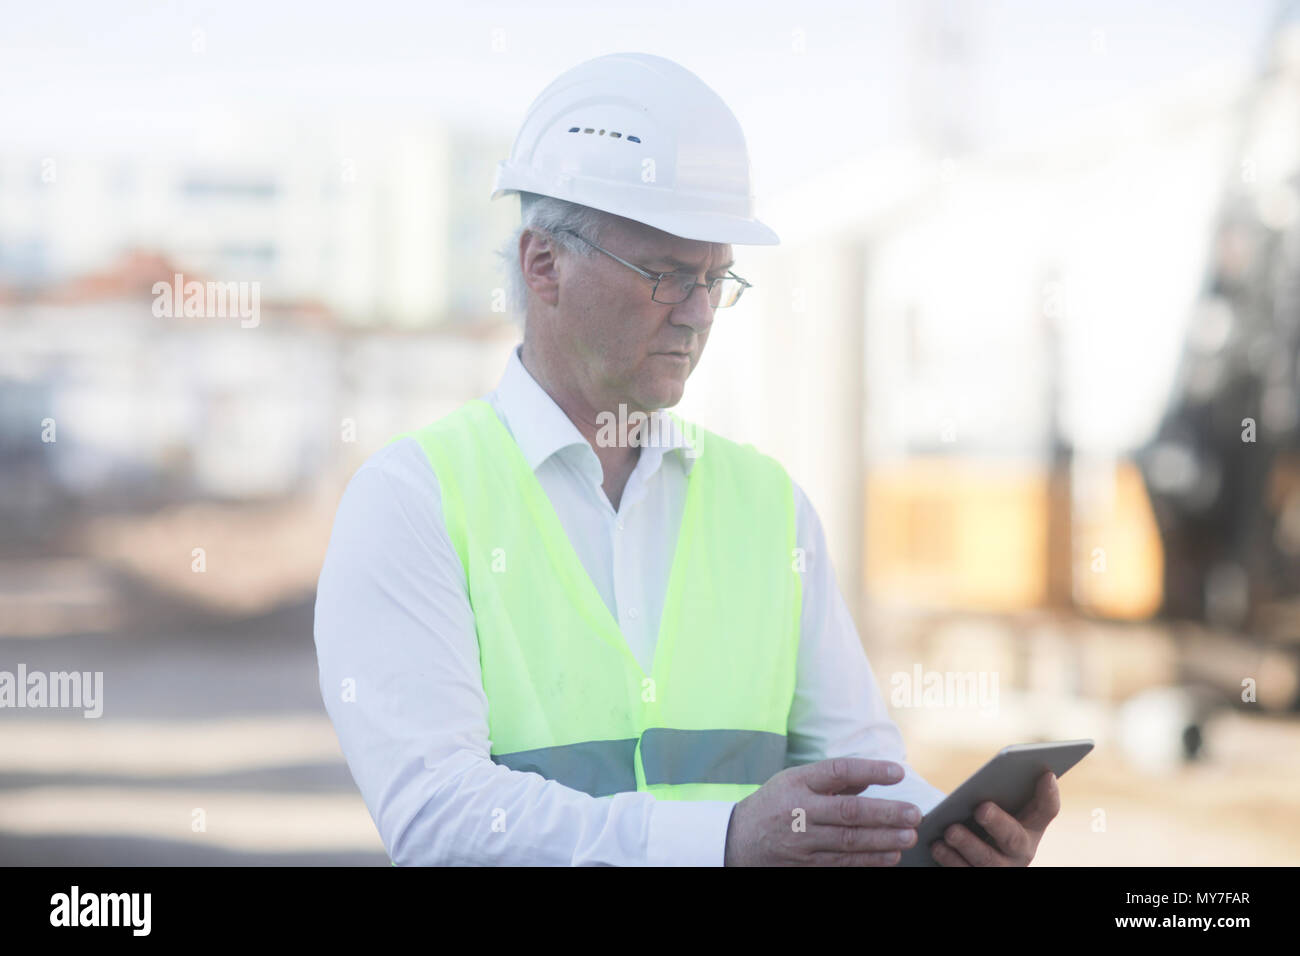 Construction worker on site Stock Photo